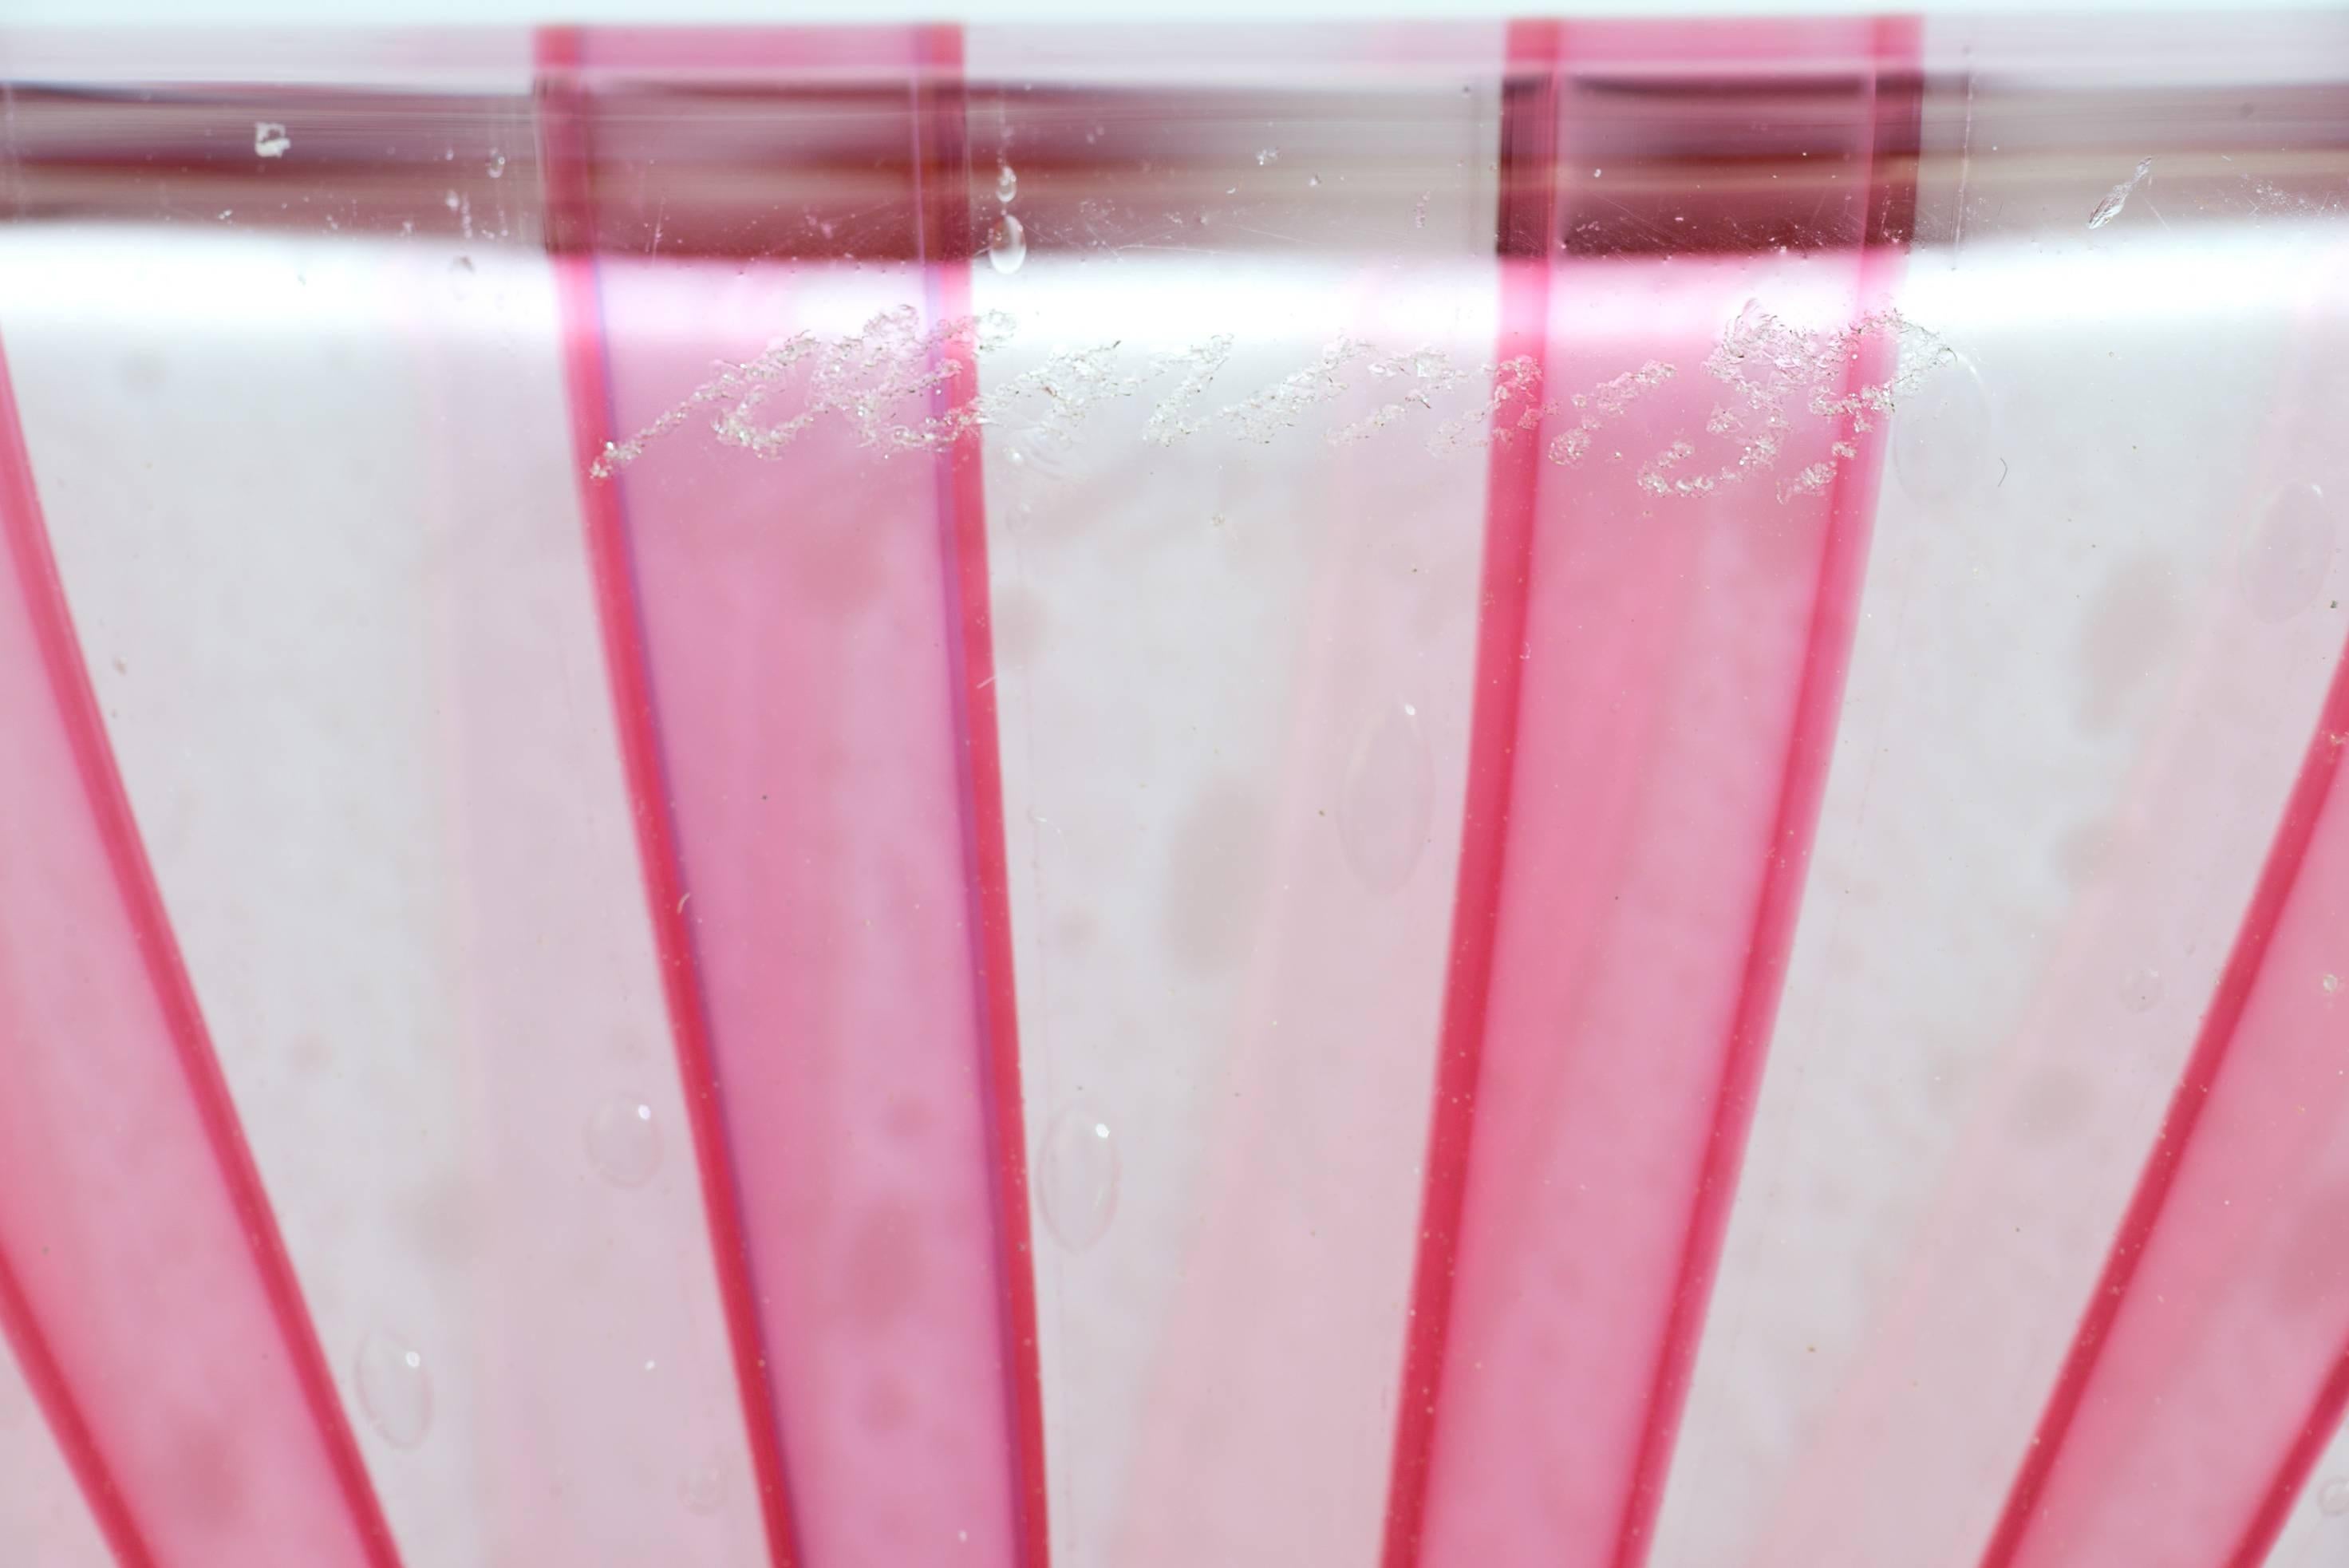 Alessandro Mendini for Venini, Berito glass vase, with vertical pink stripes, incised mark and dated with applied circular label.
Exhibited at Tingo design gallery in 2008 for the exhibition Murano a go-go. Out production. 
Original label and